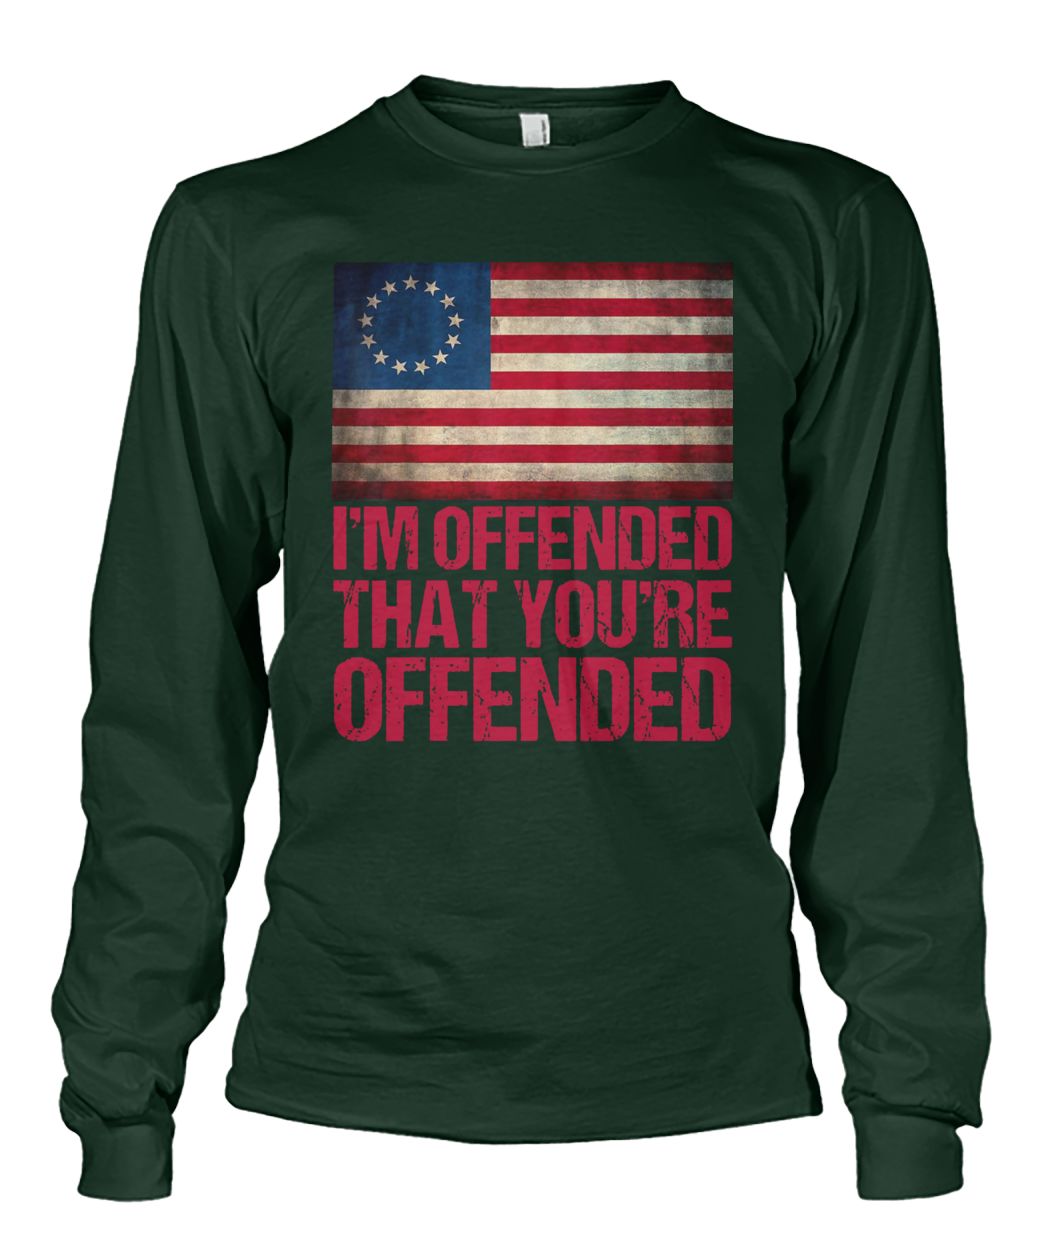 Old glory betsy ross i'm offended that you're offended unisex long sleeve